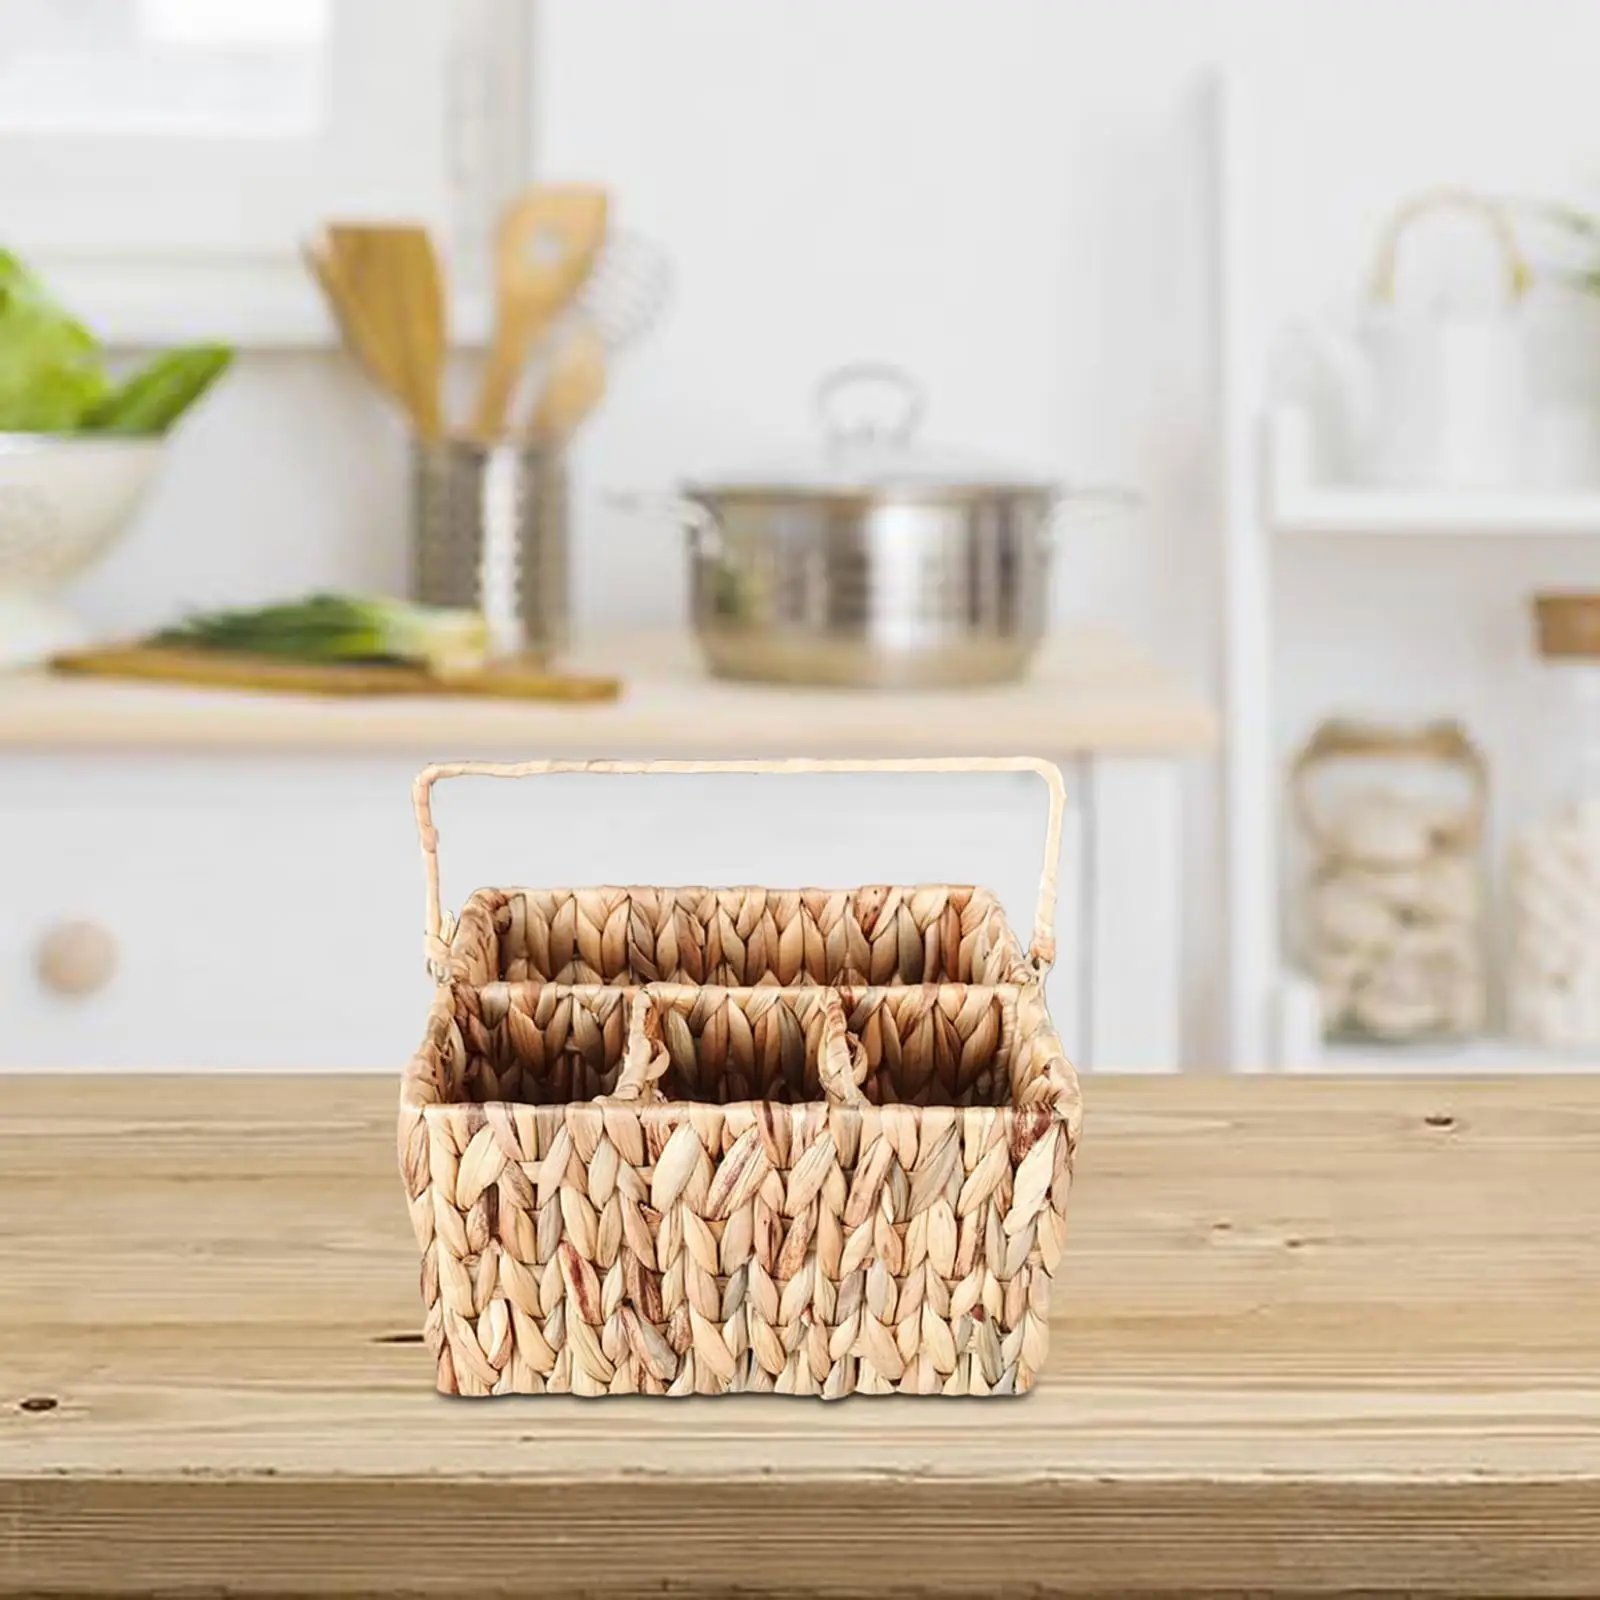 Rattan Woven Divided Storage Basket with Handle Cosmetics Holder 10x7.9x5.9inch for Organizing Tabletop Durable Lightweight